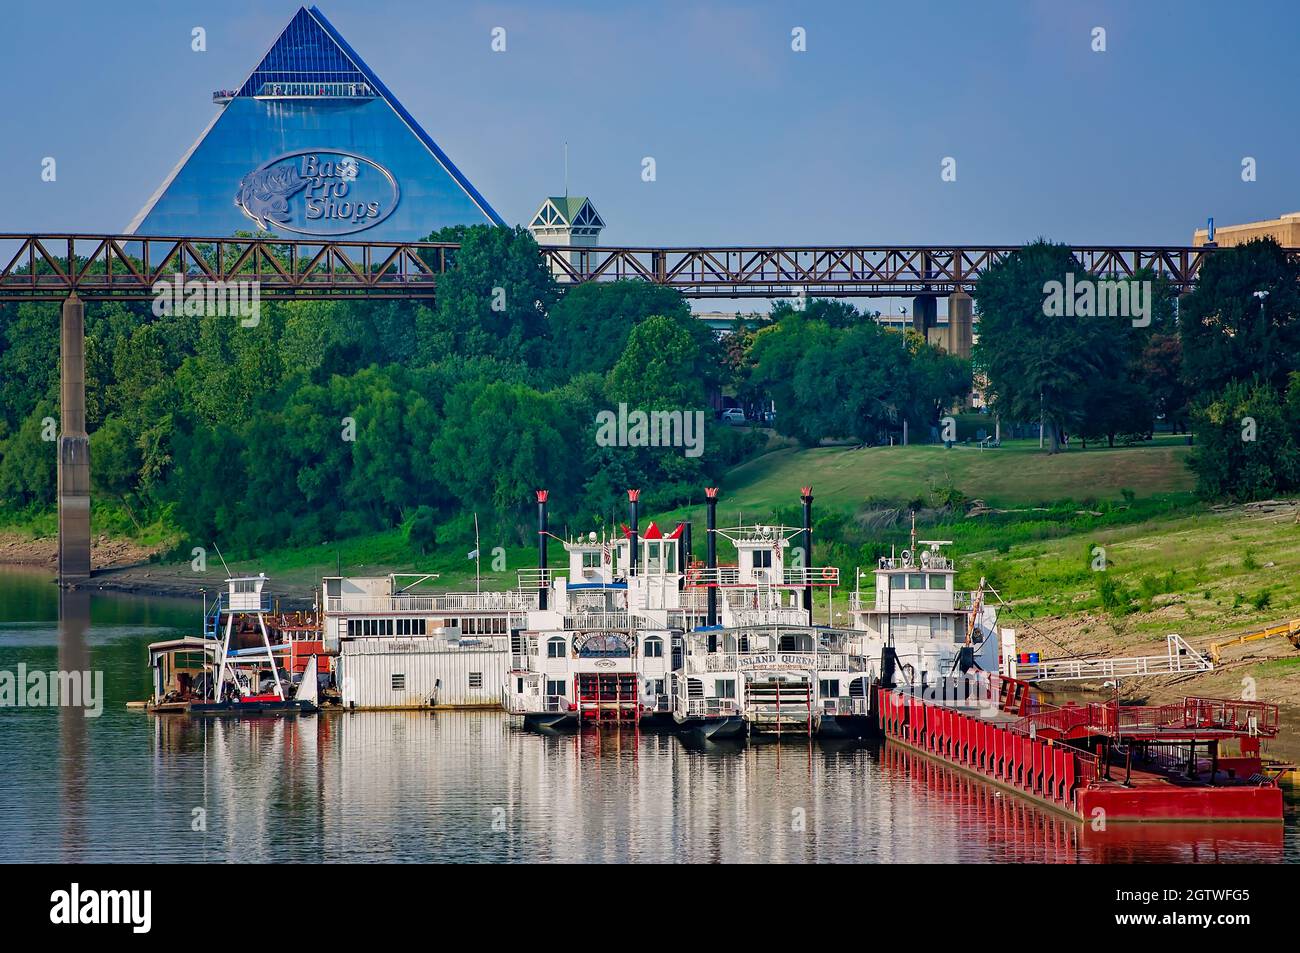 Memphis riverboats Memphis Queen III and Island Queen are pictured, Sept. 10, 2015, in Memphis, Tennessee. Stock Photo